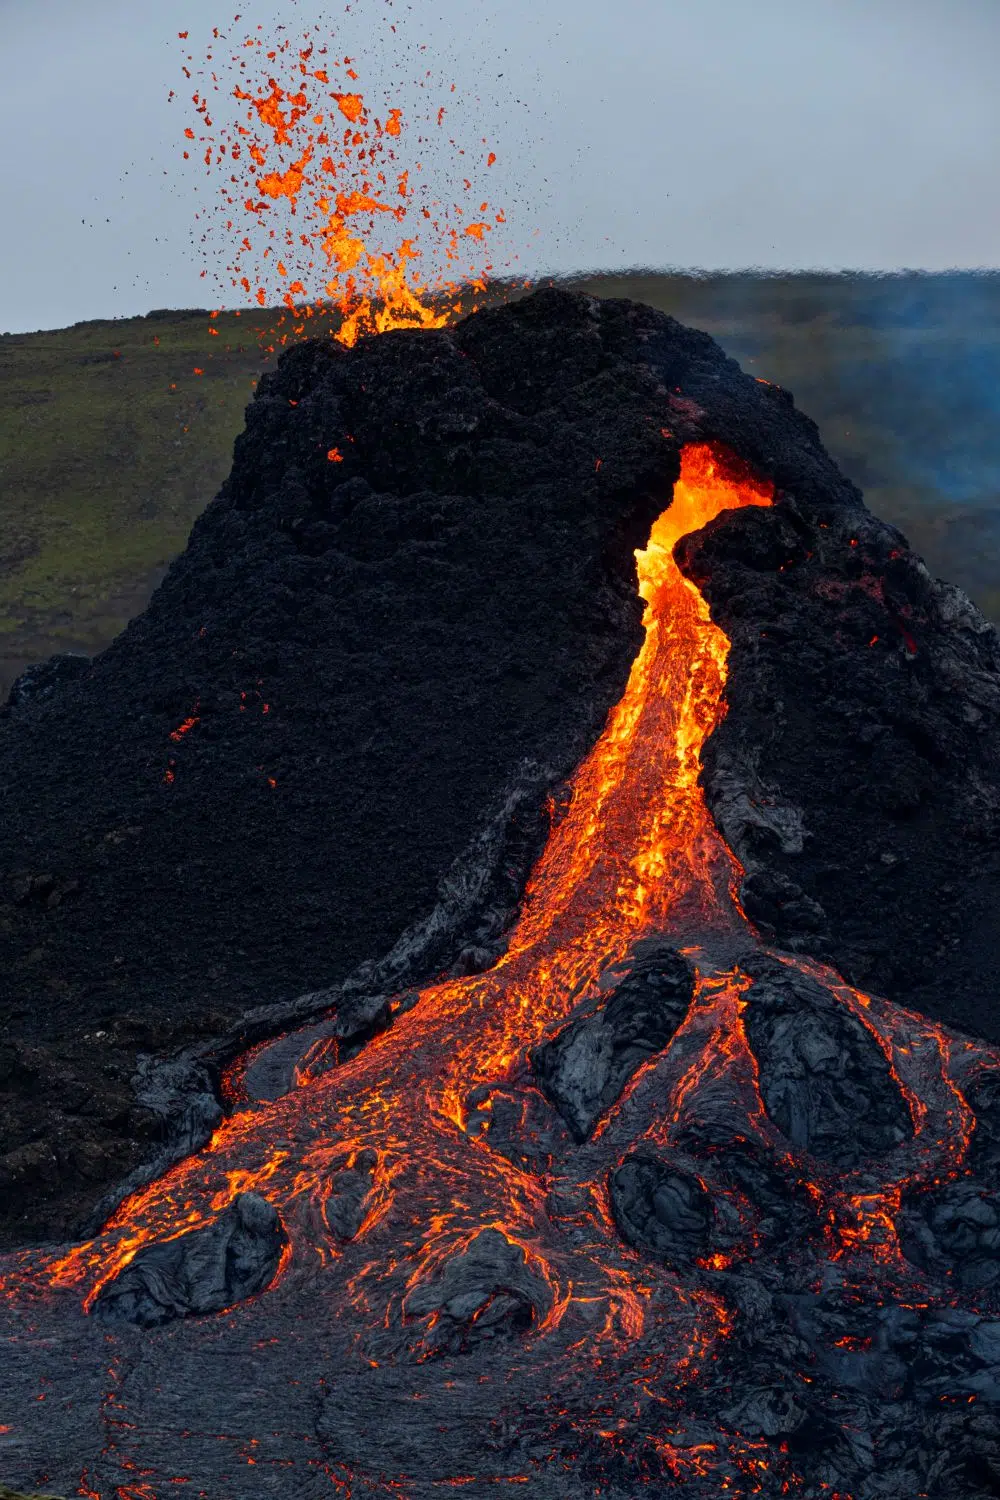 Lava flowing from the crater in Geldingadalur on the Reykjanes Peninsula